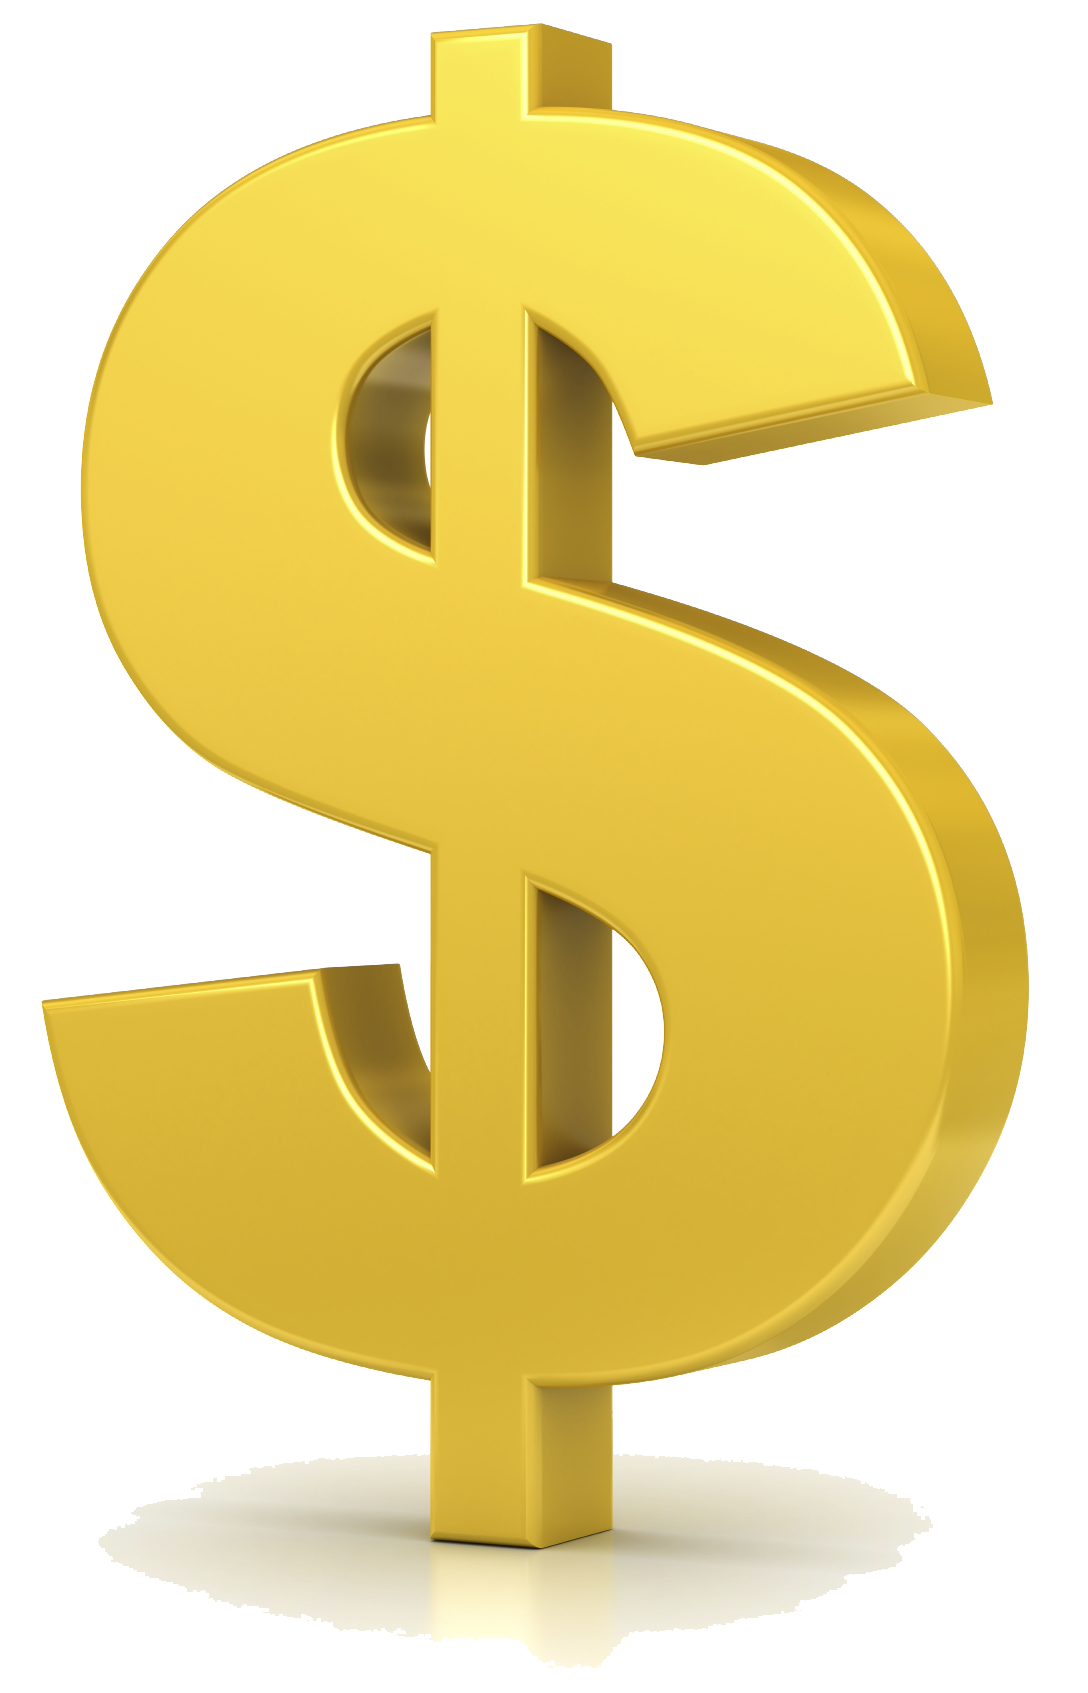 Gold Dollar Clipart PNG Image